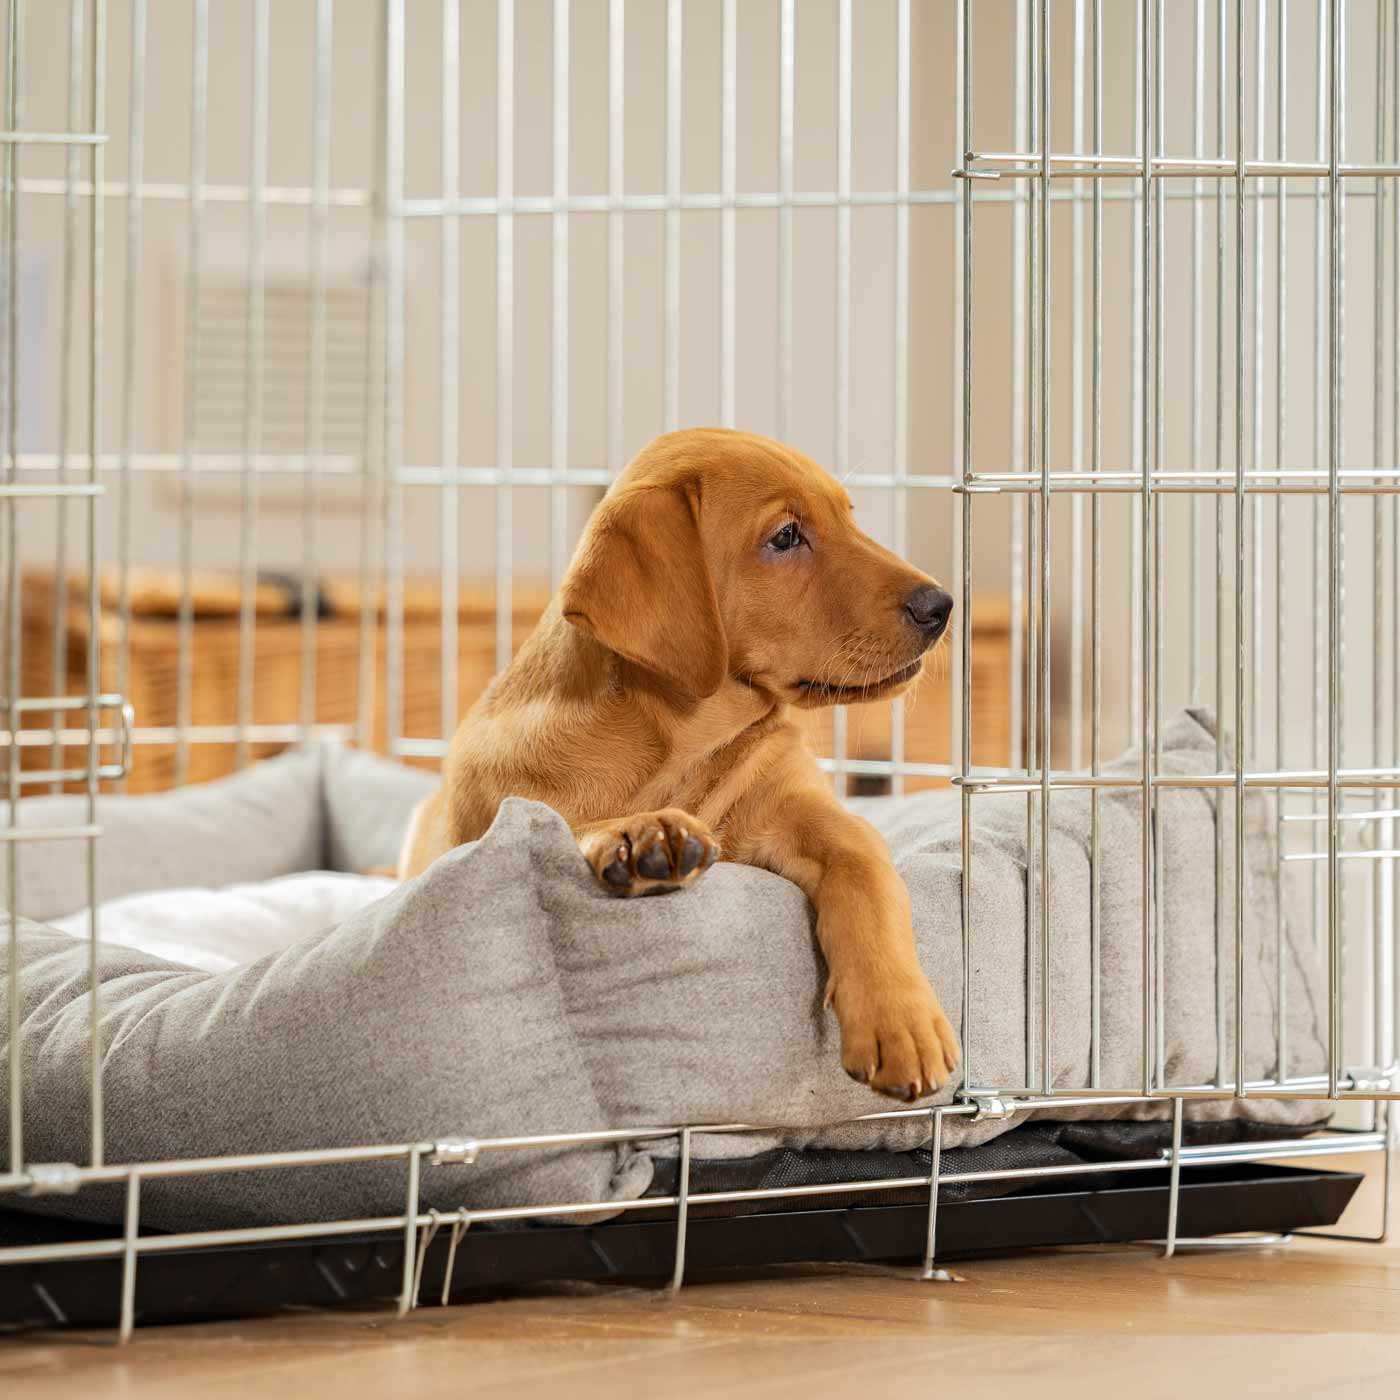 Inchmurrin Cosy & Calm Puppy Box Bed, The Perfect Dog Crate Bed For Pets! To Build The Ultimate Dog Den! In Dark Grey Ground! Available To Personalise Now at Lords & Labradors 